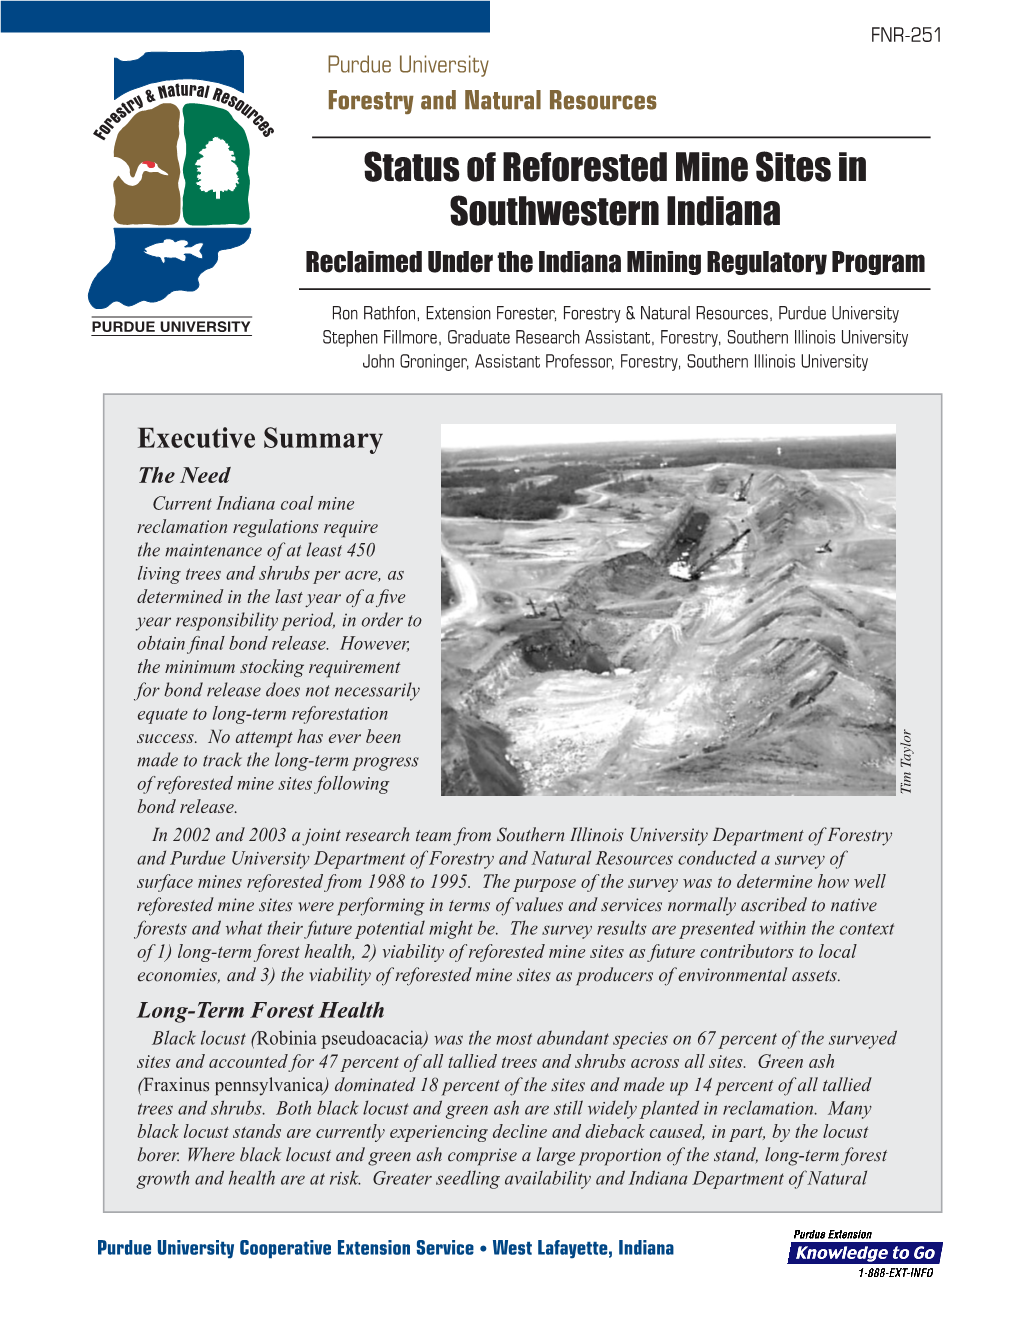 Status of Reforested Mine Sites in Southwestern Indiana Reclaimed Under the Indiana Mining Regulatory Program